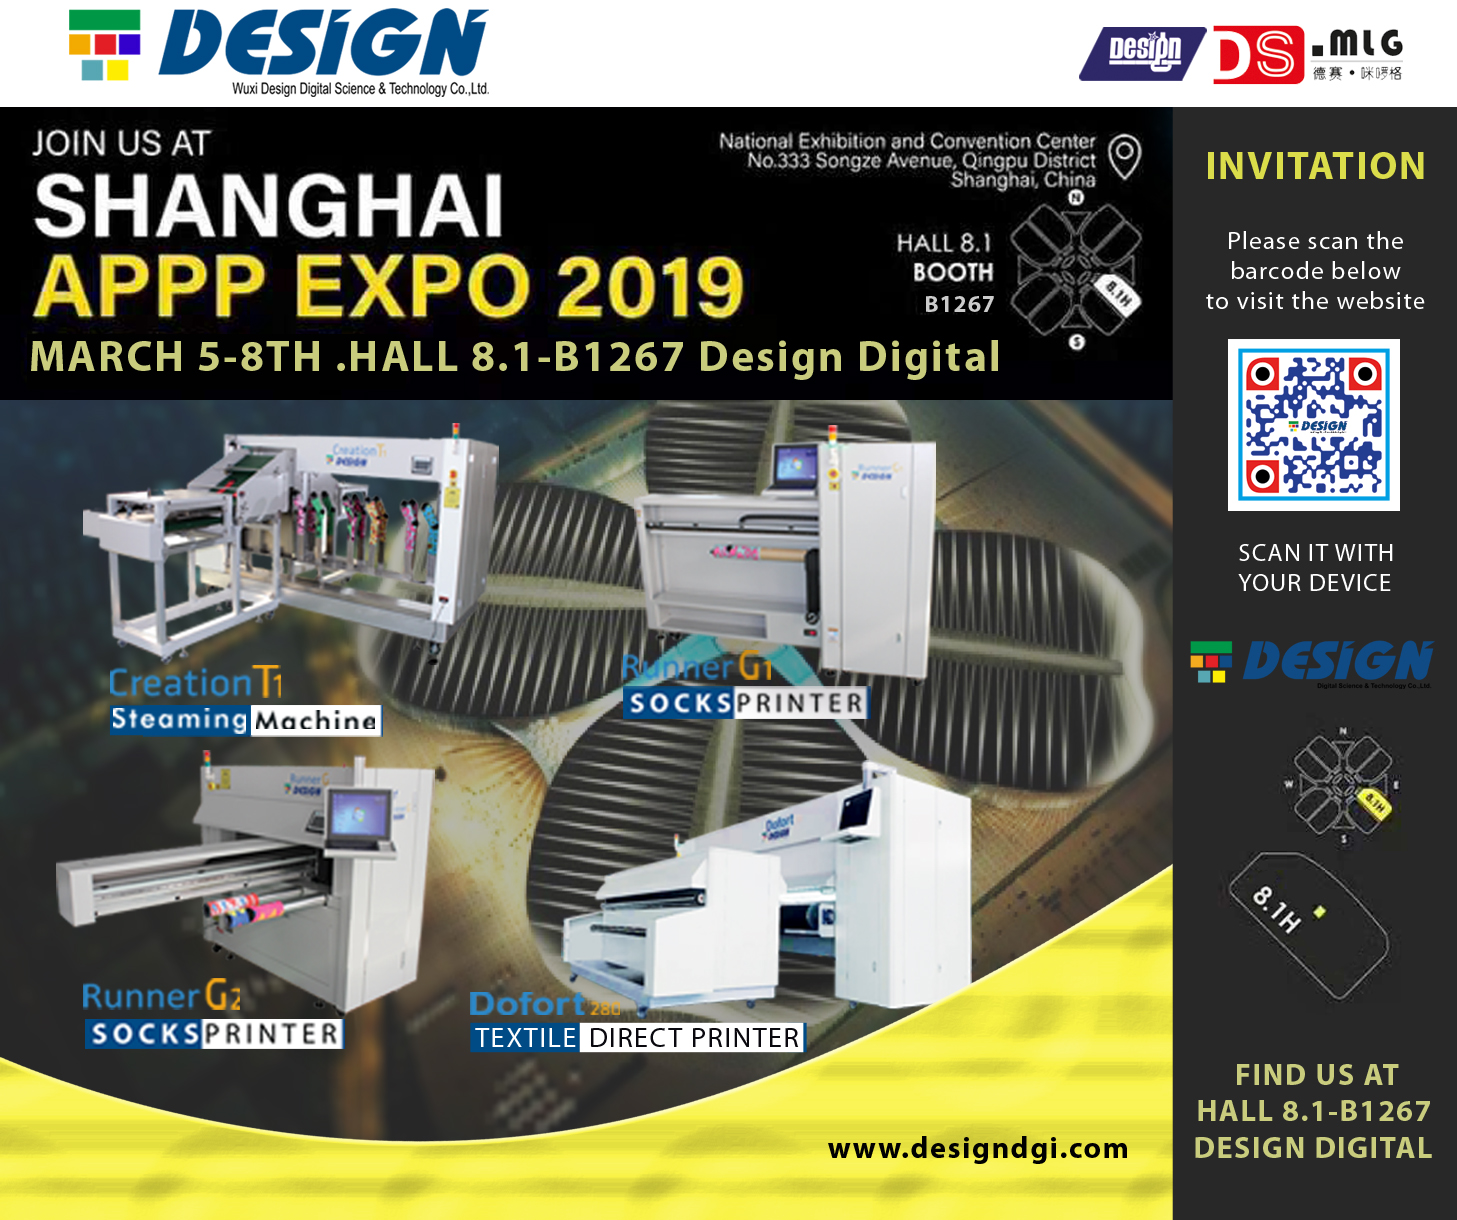 Design attends Shanghai APPPEXPO, launching new soft signage printing solution!